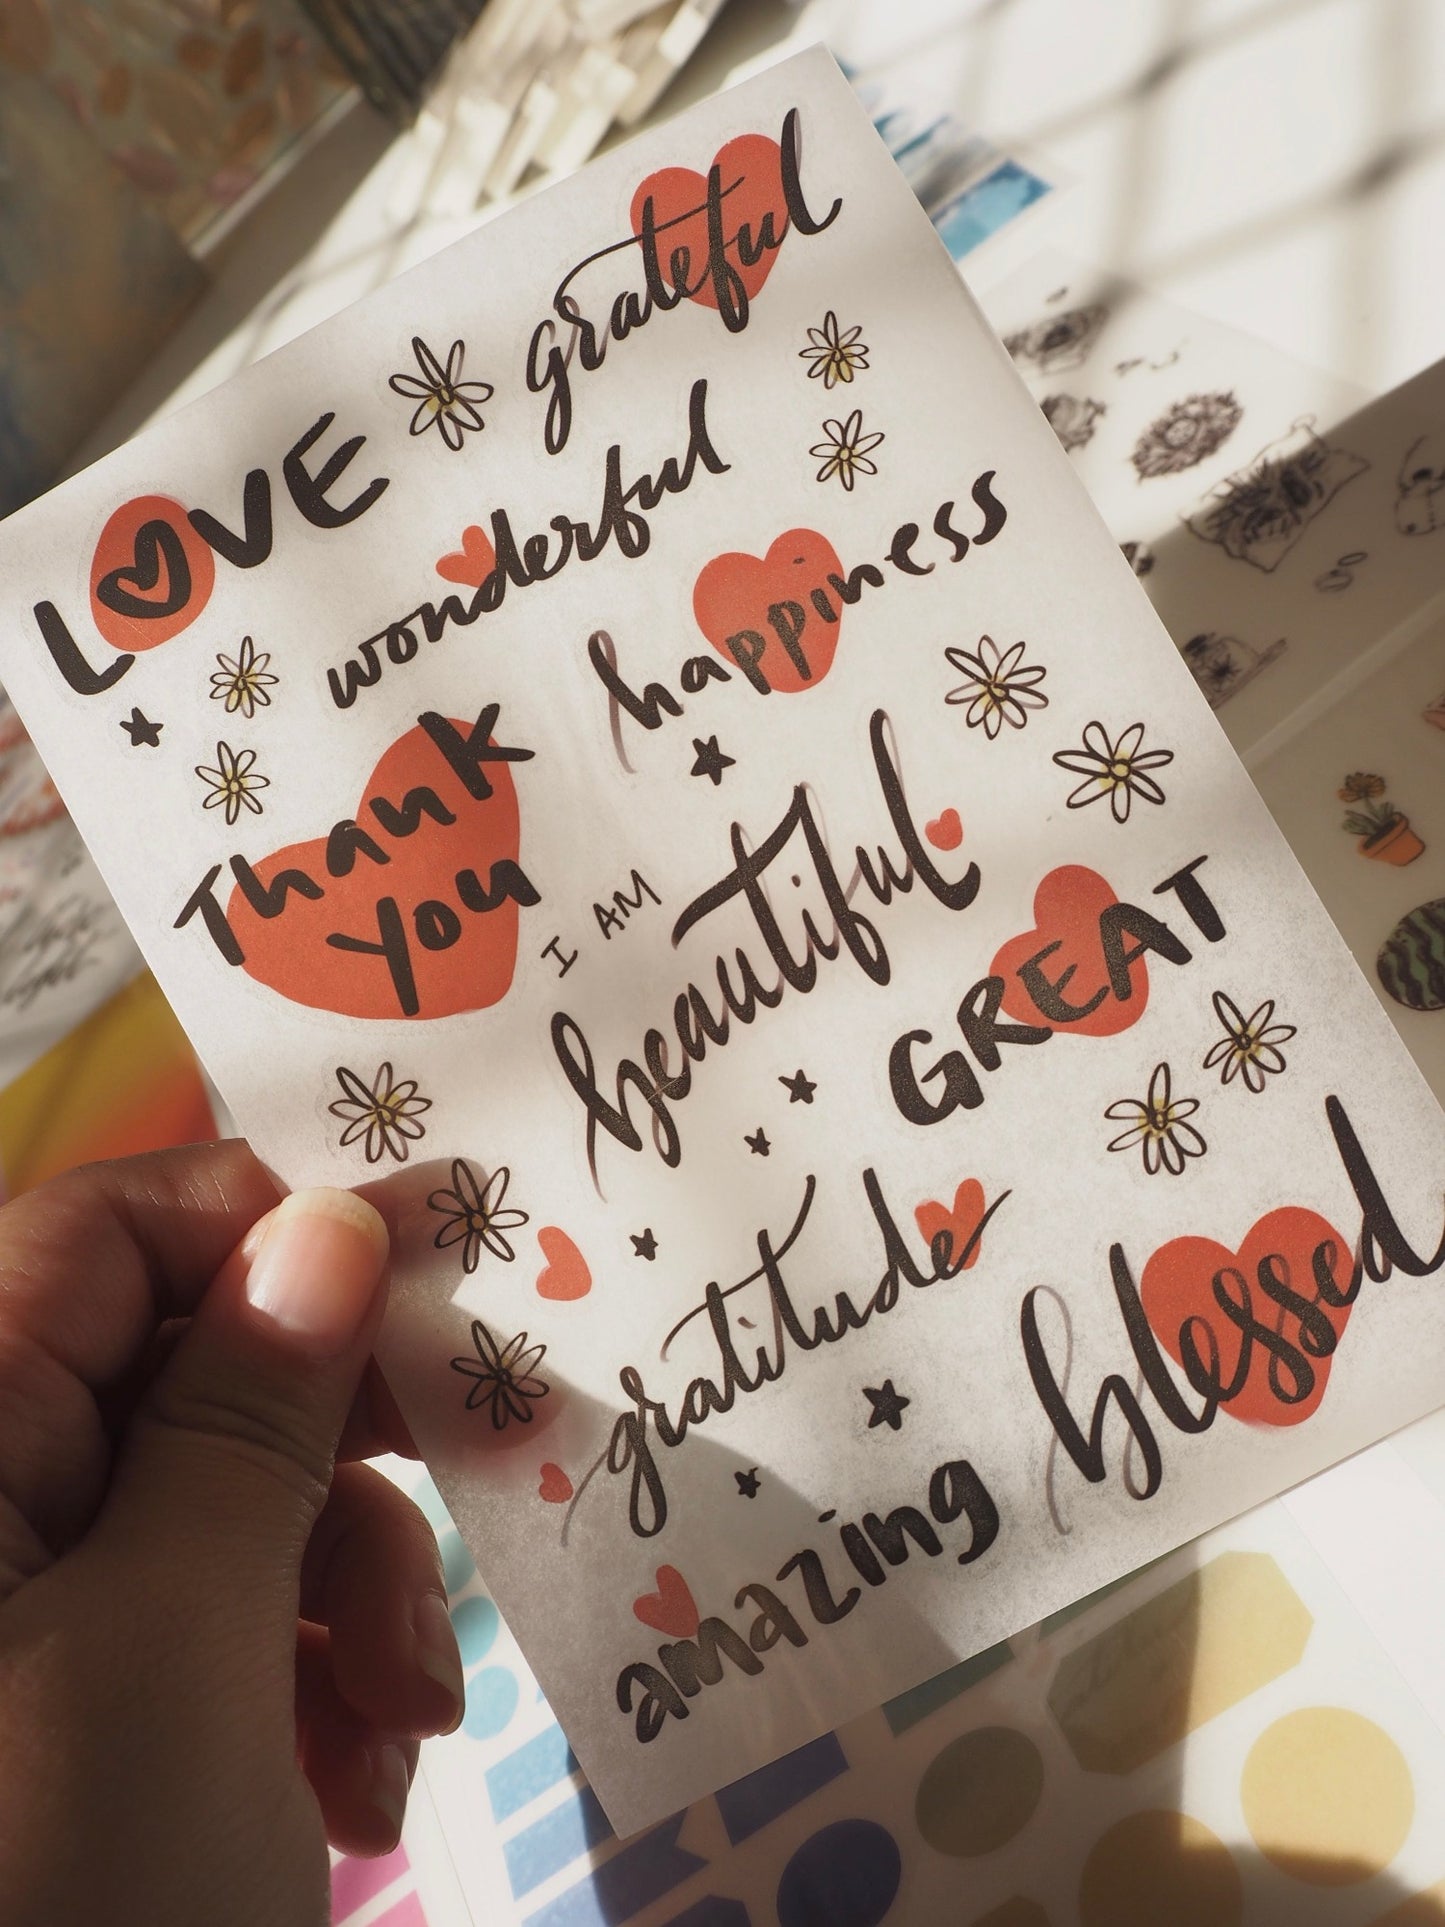 Lovely Words - Rub-on Stickers/ Transfer Stickers 021 (LFSO)